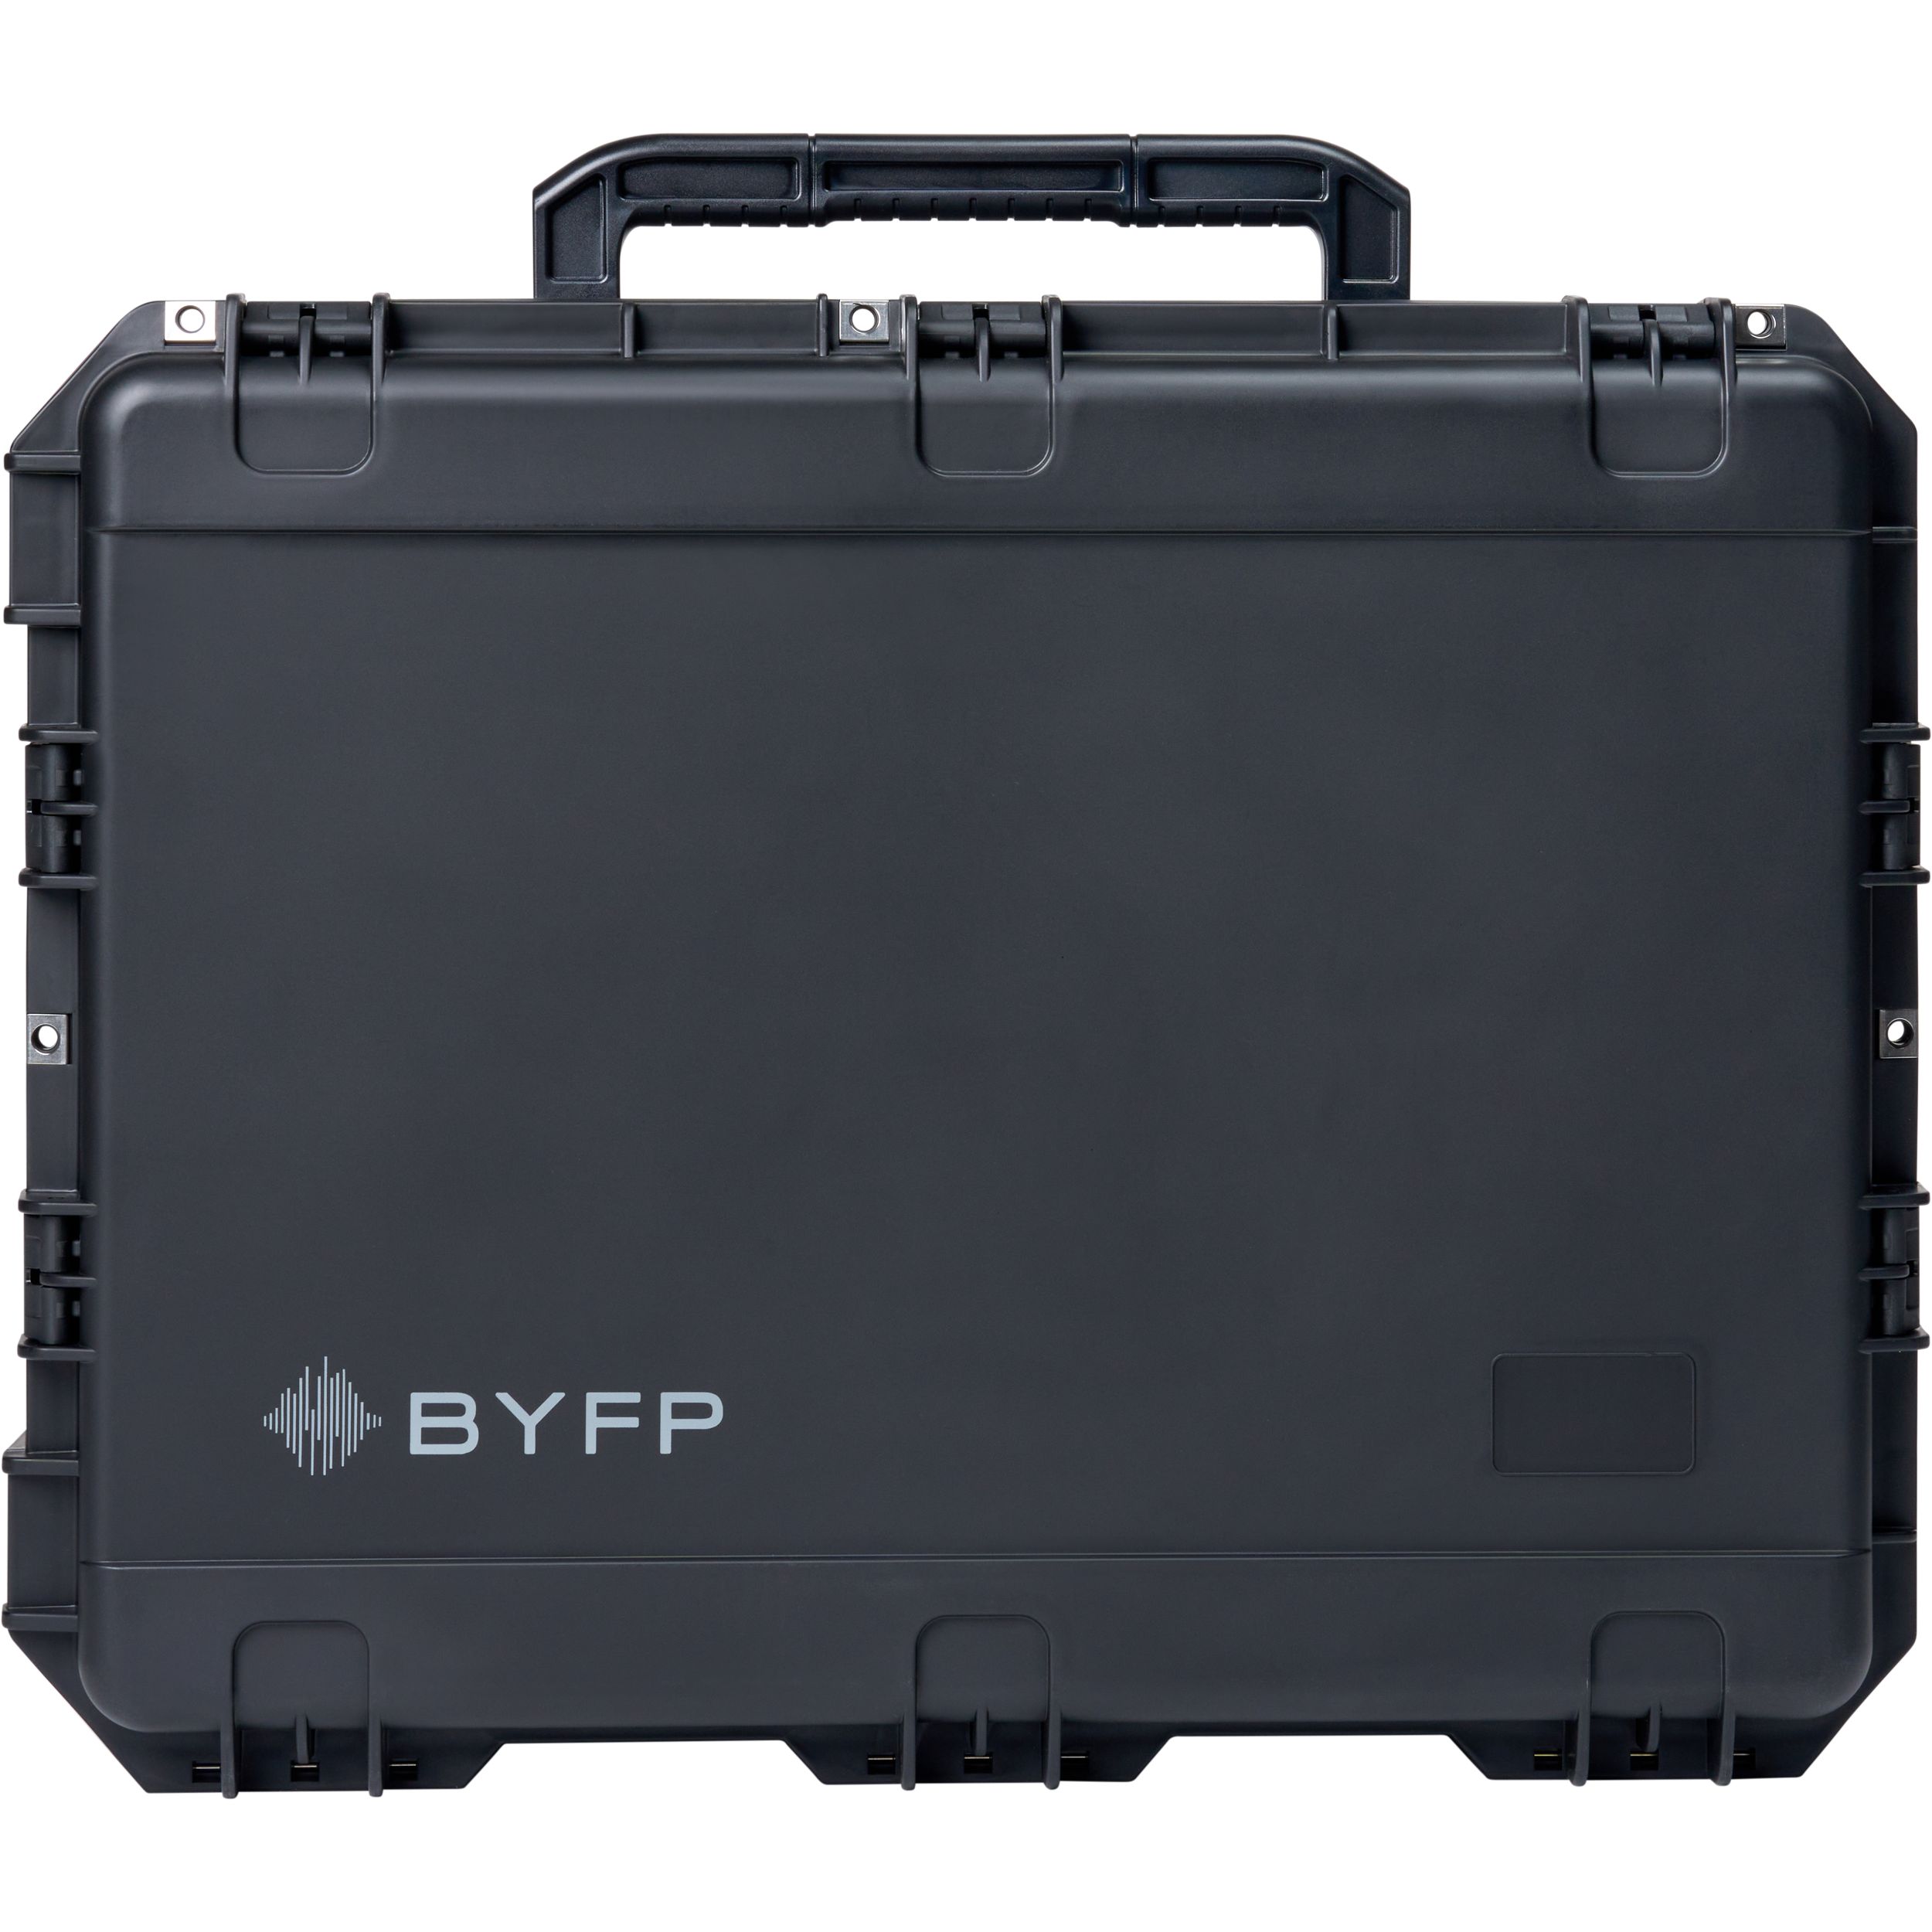 BYFP ipCase for MA grandMA3 Compact Lighting Console